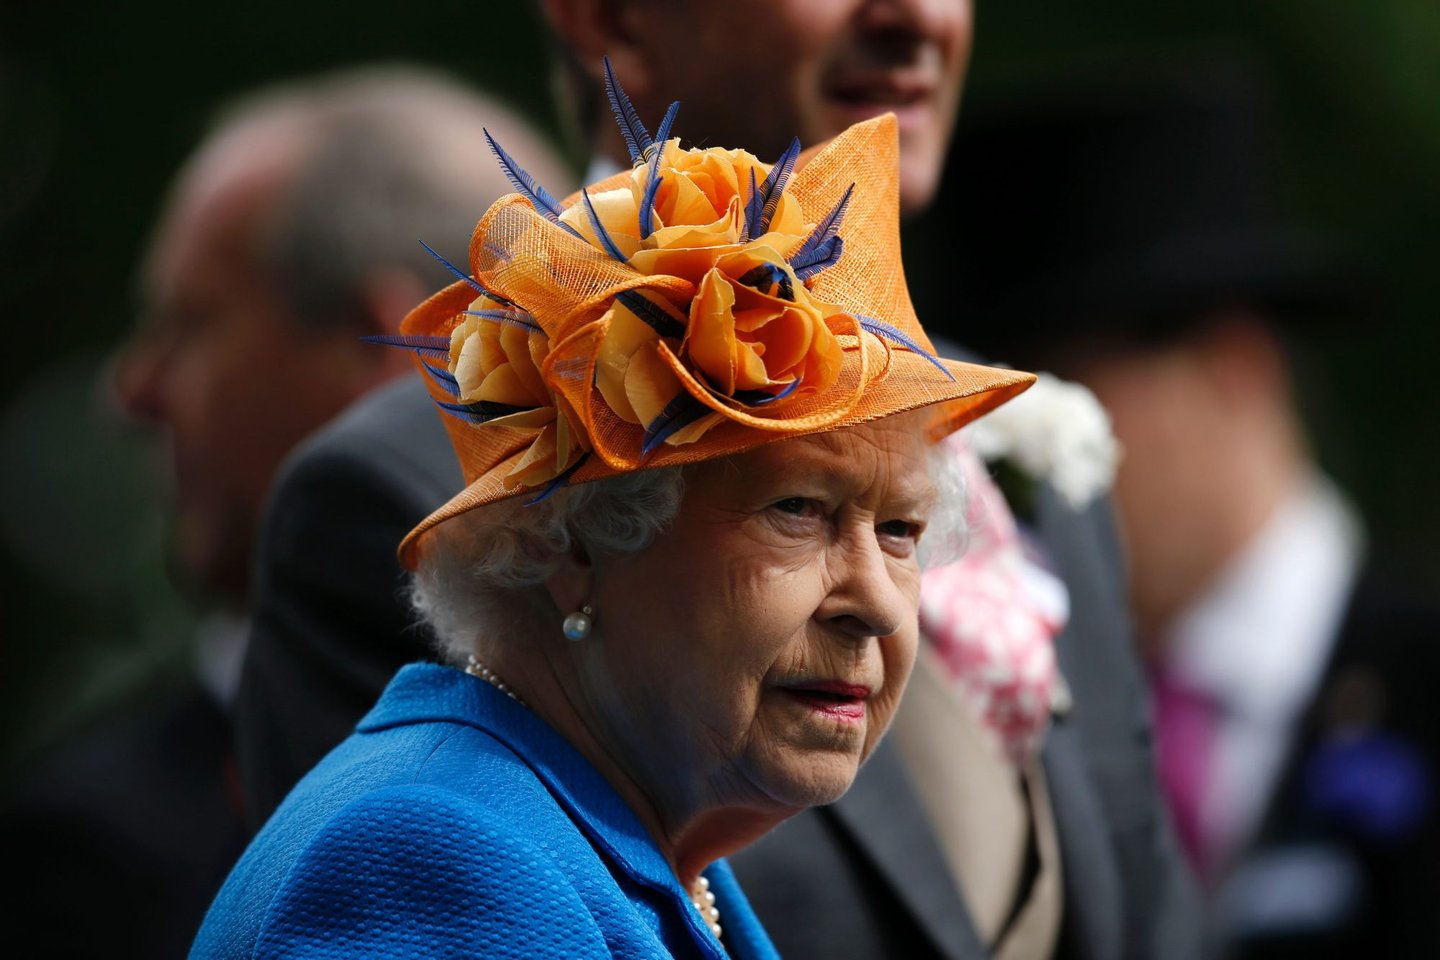 Britain's Queen Elizabeth II looks on during the presentation ceremony for the Gold Cup during Ladies' day at Royal Ascot horse racing meet in Ascot, west of London on June 16, 2016. The five-day meeting is one of the highlights of the horse racing calendar. Horse racing has been held at the famous Berkshire course since 1711 and tradition is a hallmark of the meeting. Top hats and tails remain compulsory in parts of the course while a daily procession of horse-drawn carriages brings the Queen to the course. / AFP / ADRIAN DENNIS (Photo credit should read ADRIAN DENNIS/AFP/Getty Images)